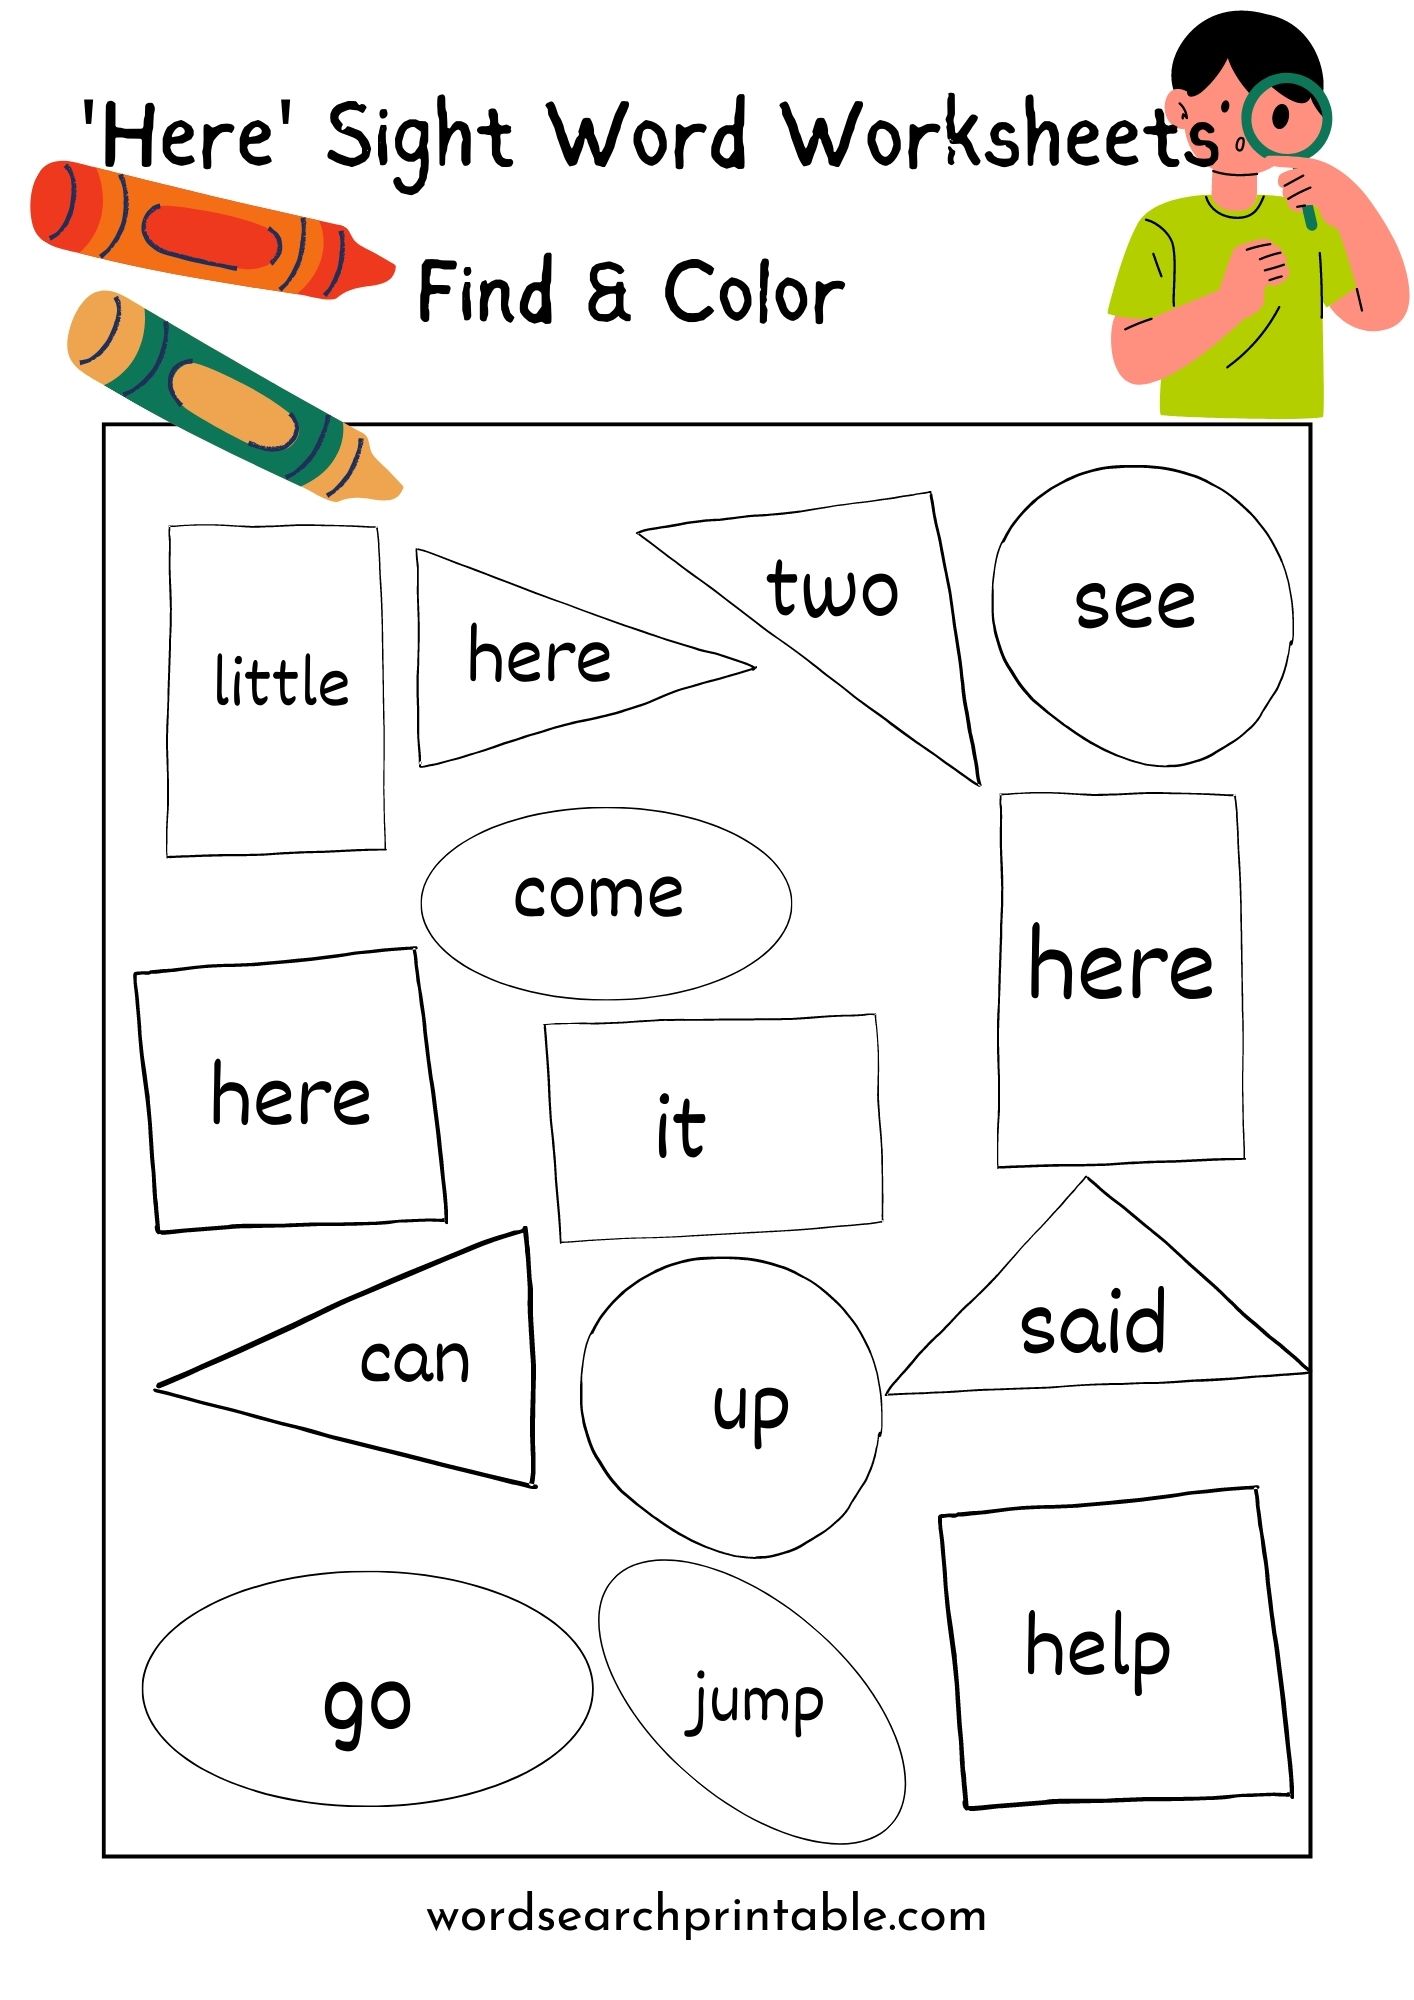 Find the sight word Here and Color the geometric shape